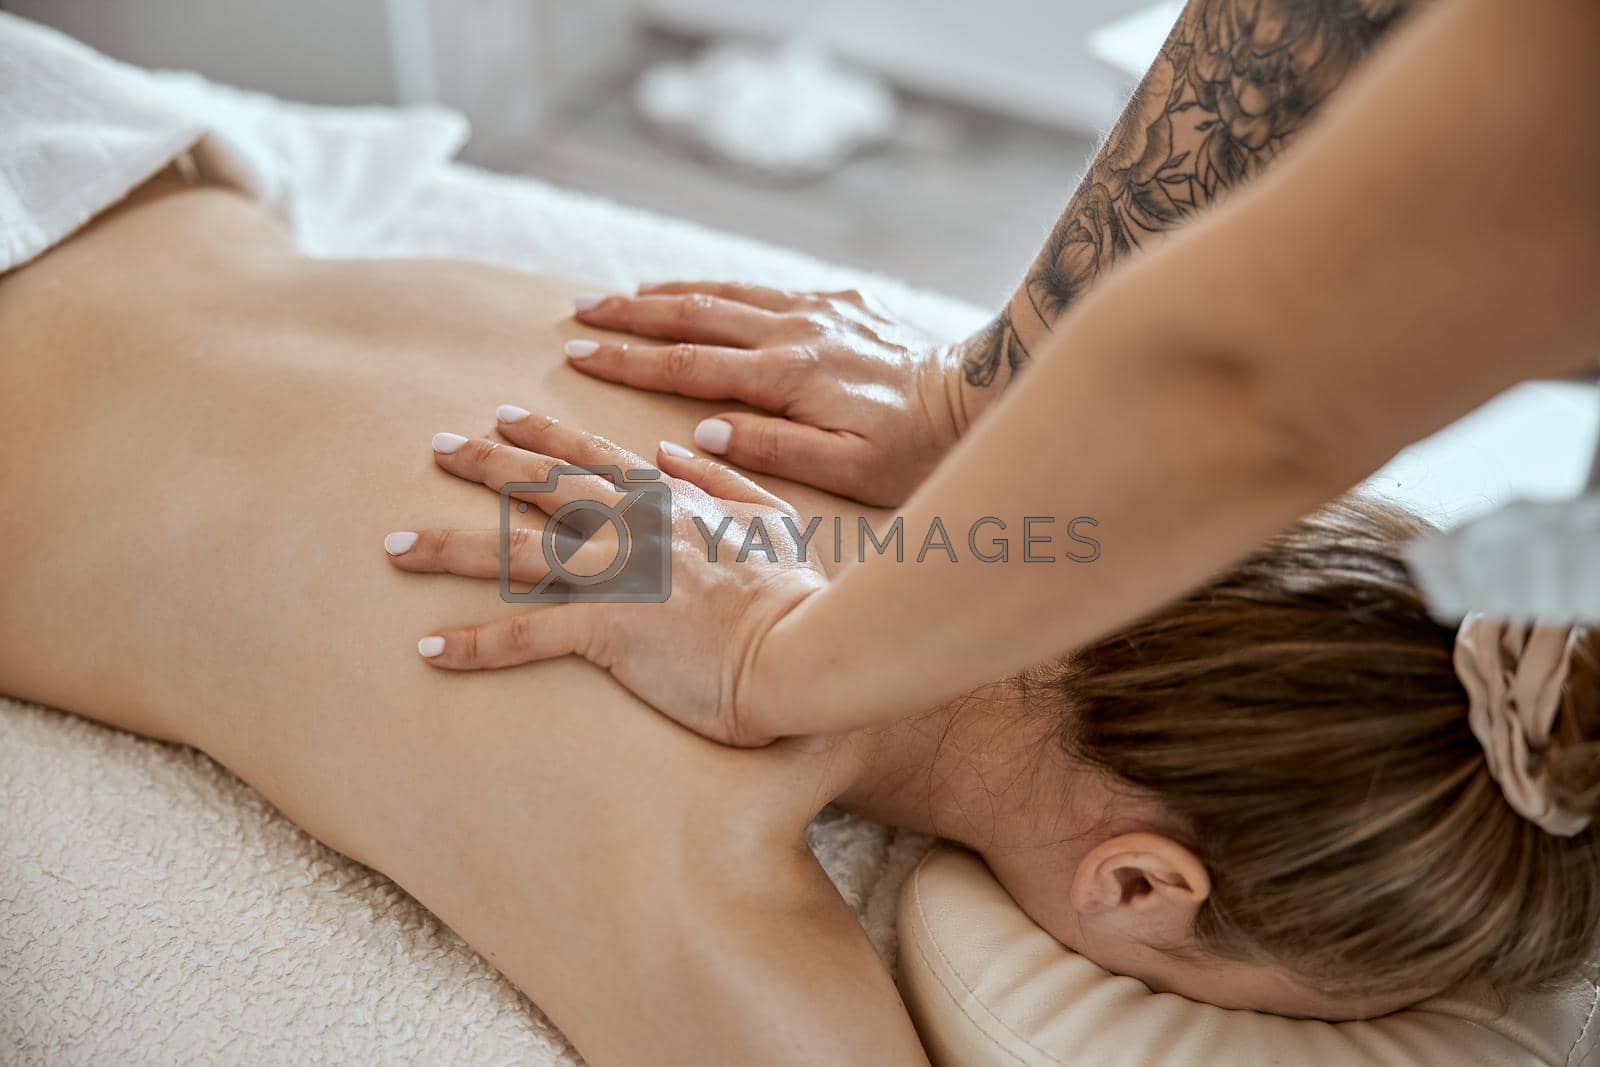 Royalty free image of Professional confident massage master is doing procedures to caucasian woman in minimalistic modern cabinet by Yaroslav_astakhov